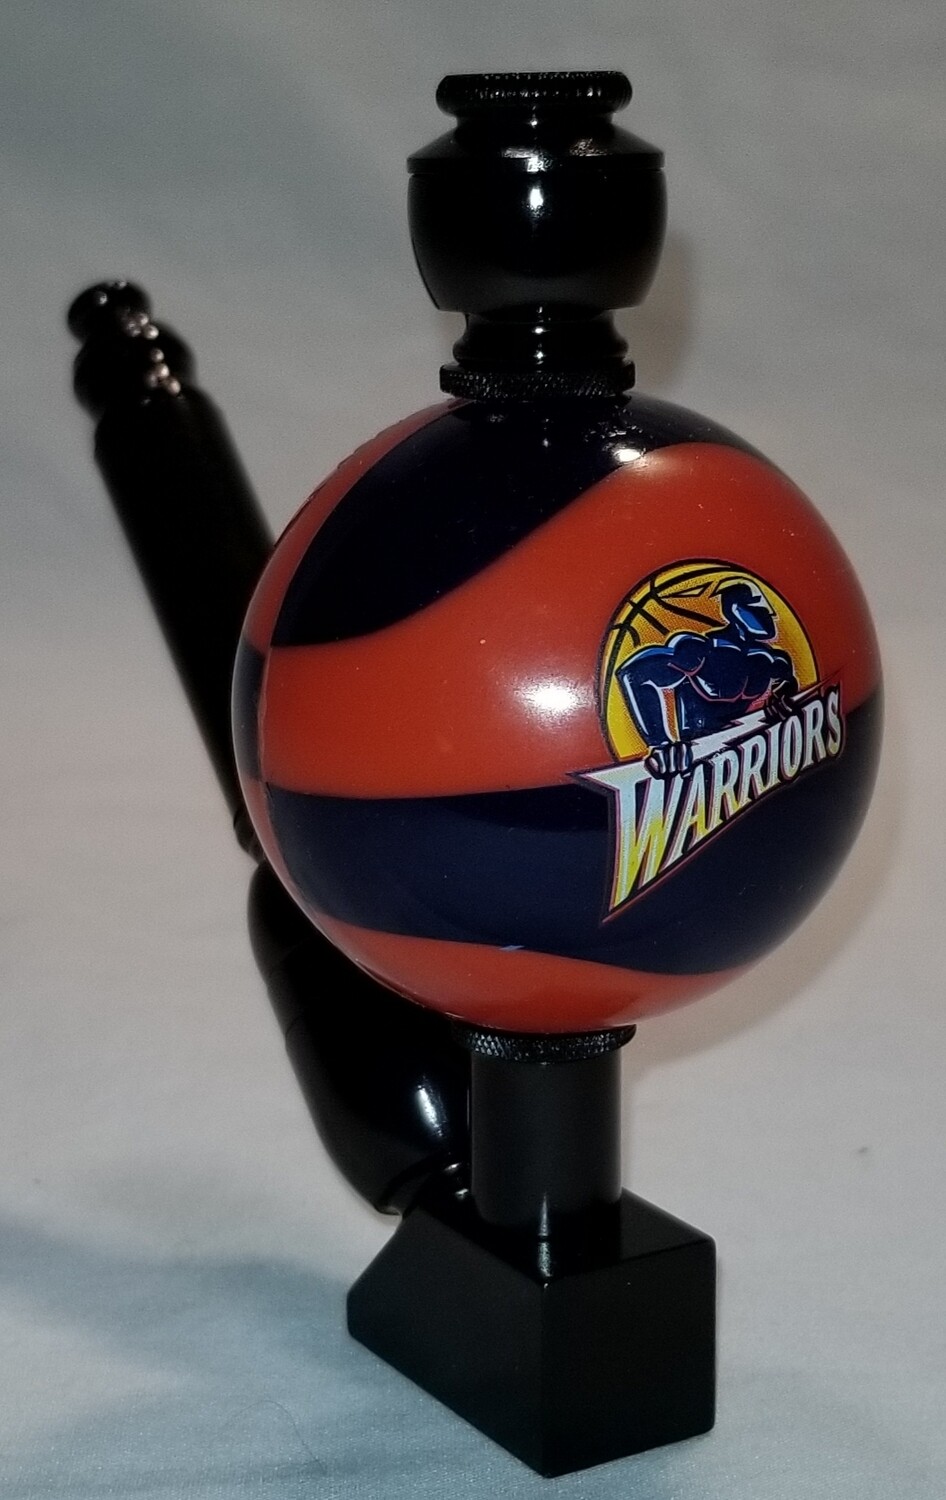 GOLDEN STATE WARRIORS "BAD ASS" COLOR BASKETBALL SMOKING PIPE Wedge/Black Anodized/Color Ball